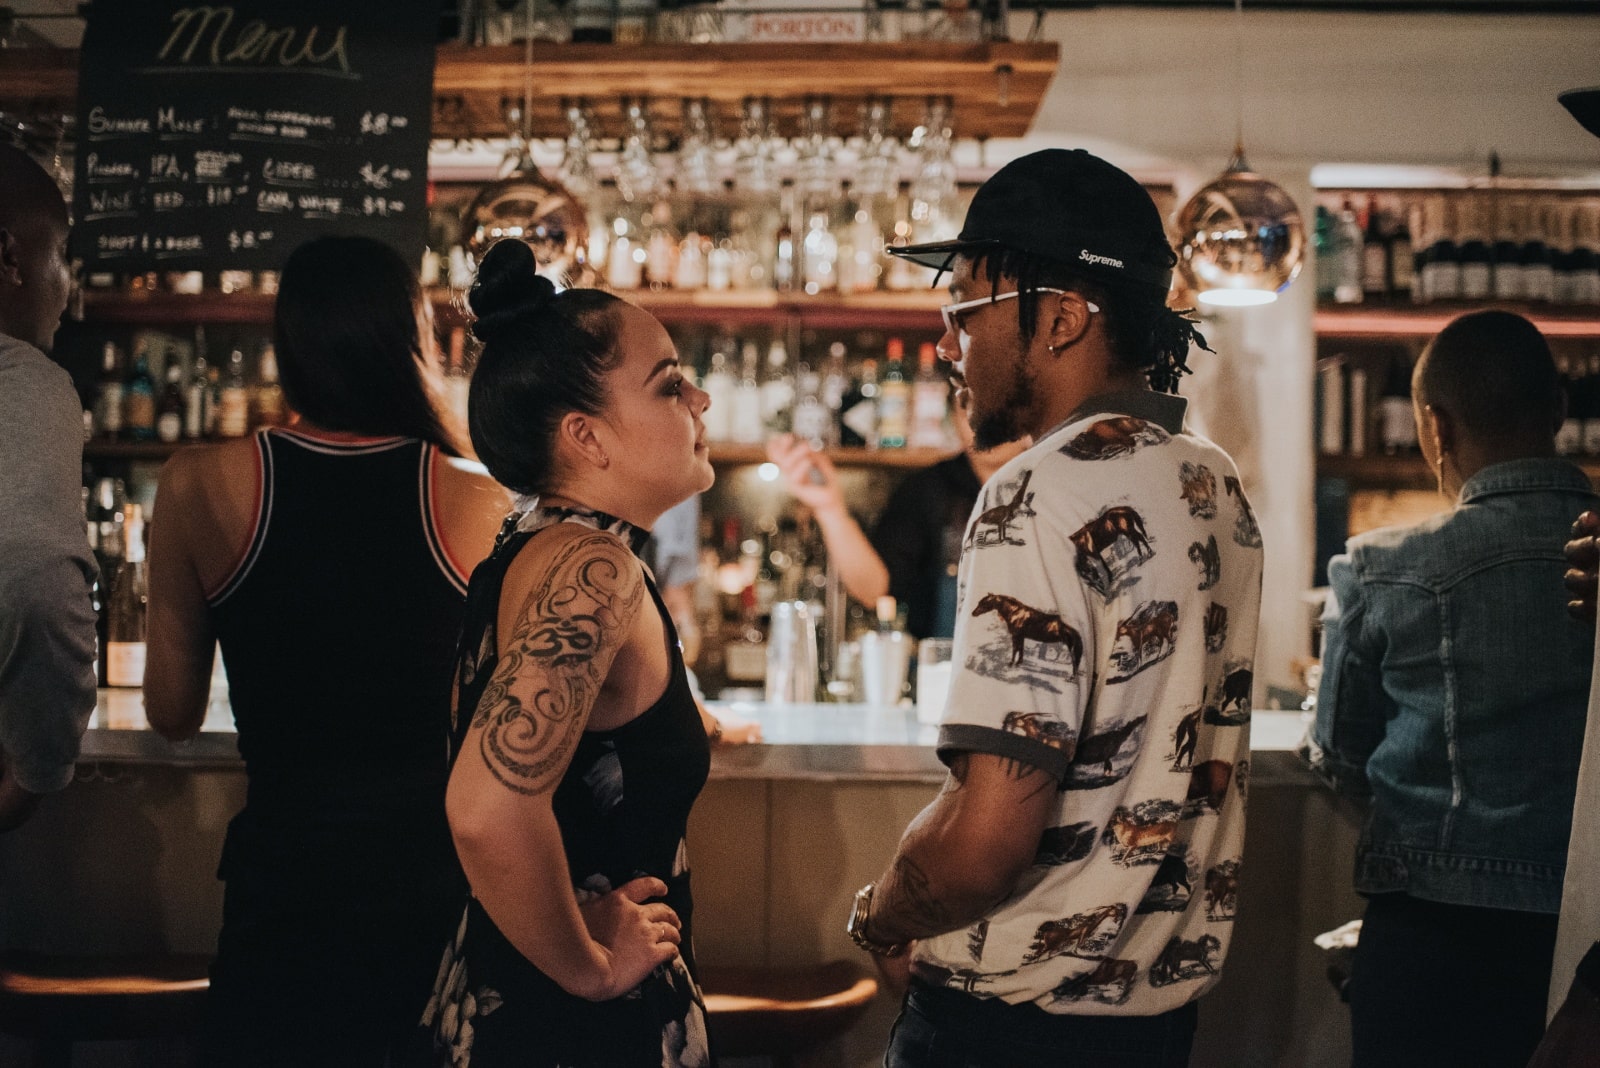 man and woman making eye contact while standing in bar